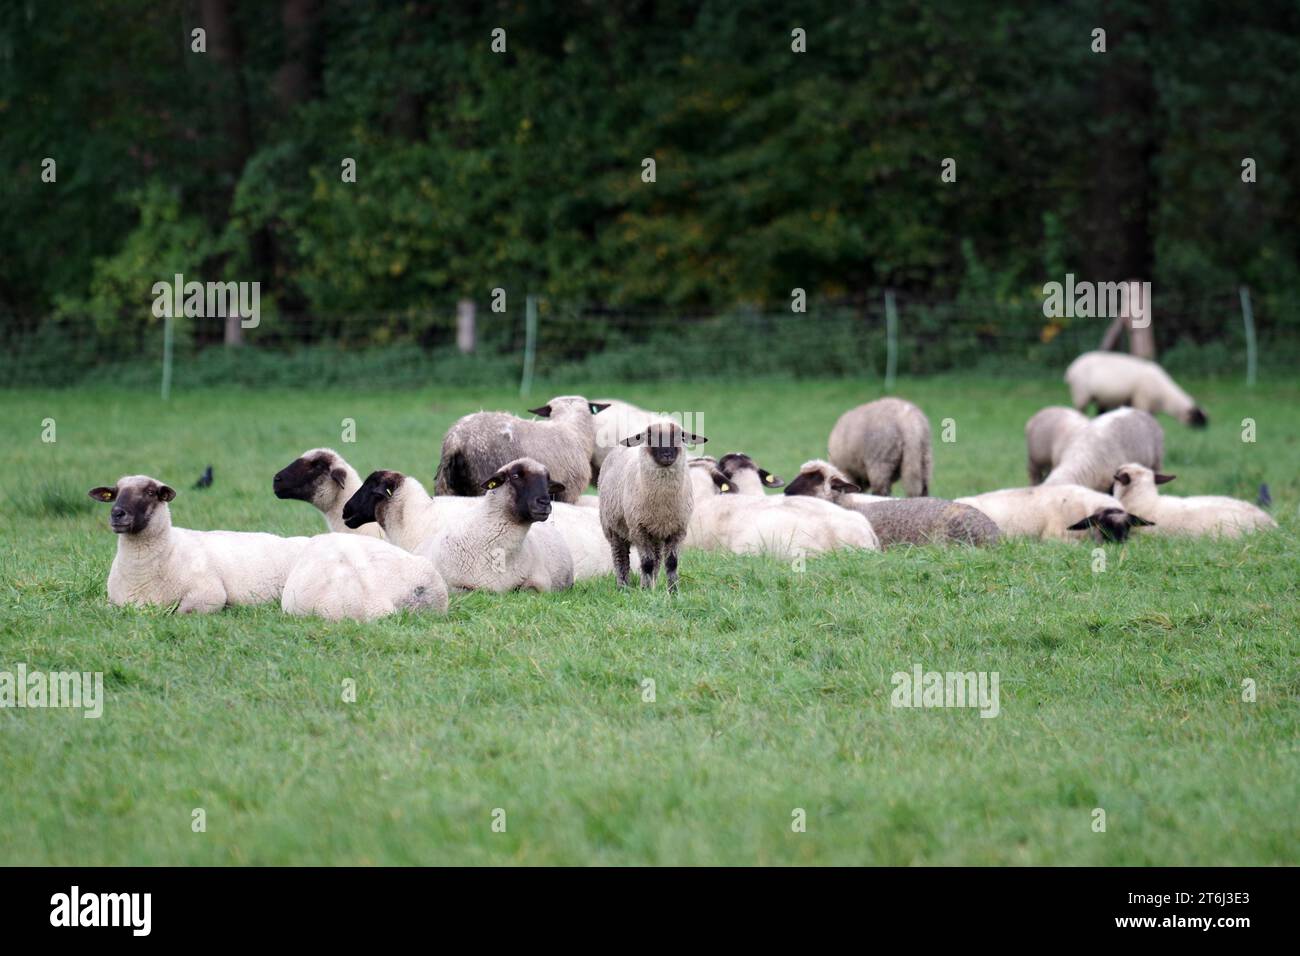 Sheep (Ovis), domestic animals, flock of sheep, pasture, lying, resting, North Rhine-Westphalia, Germany, A flock of black-headed sheep rests on the Stock Photo